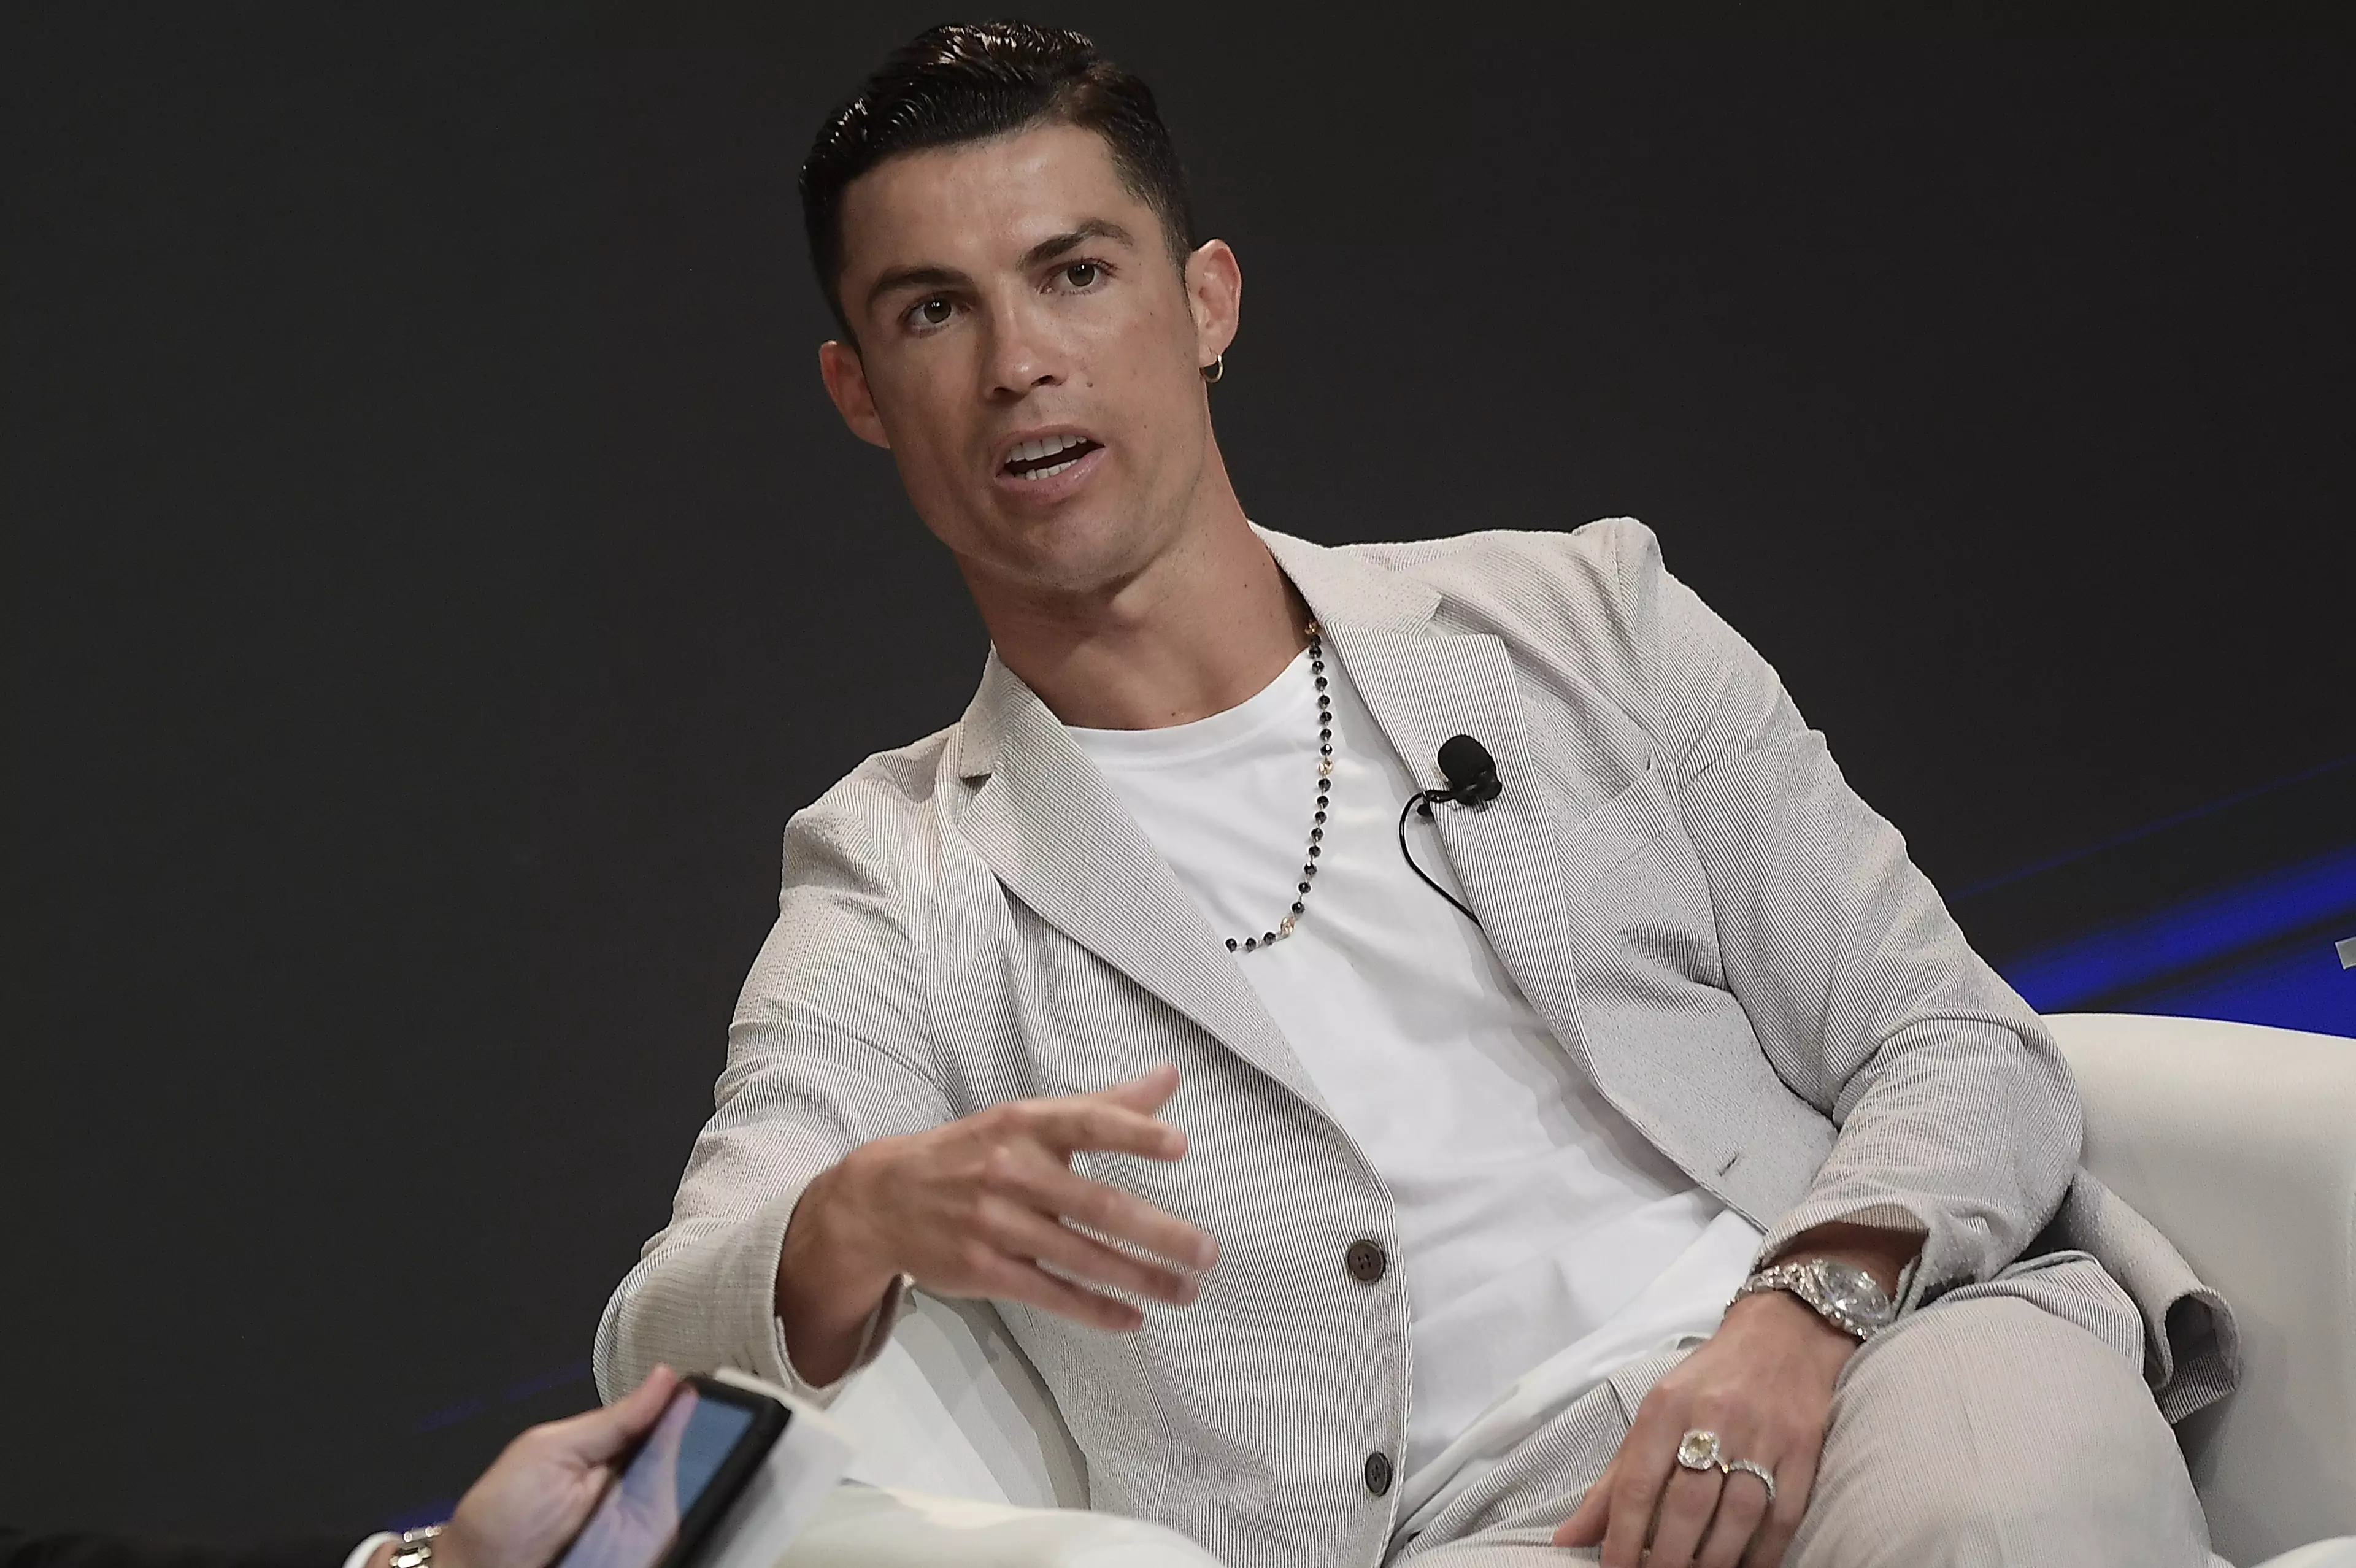 Ronaldo looking like he's being interviewed about his latest acting role. Image: PA Images